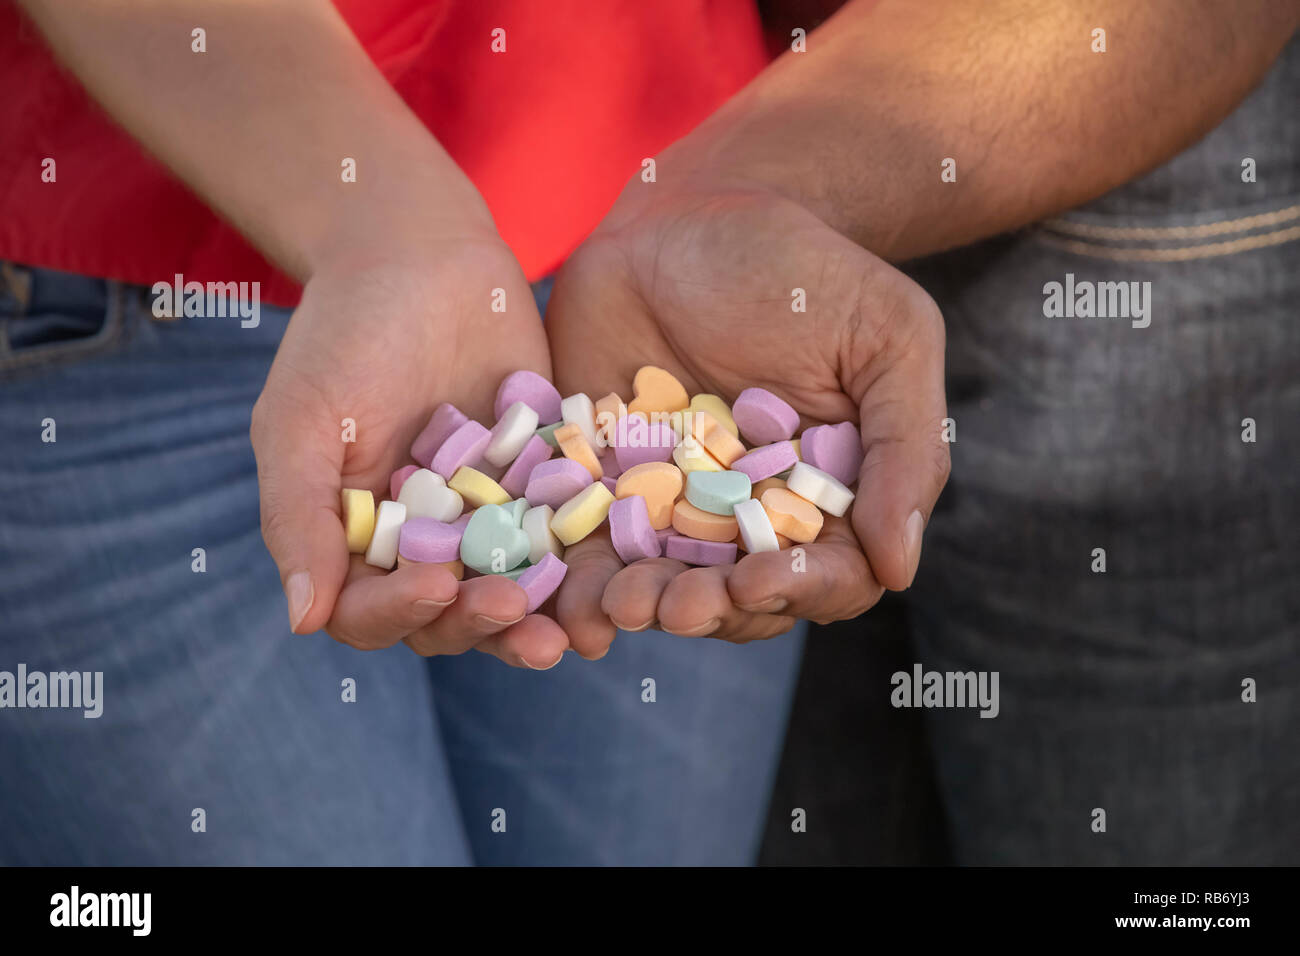 They hold each other close so not to drop any of the colorful heart shape Valentines Day candy. Stock Photo